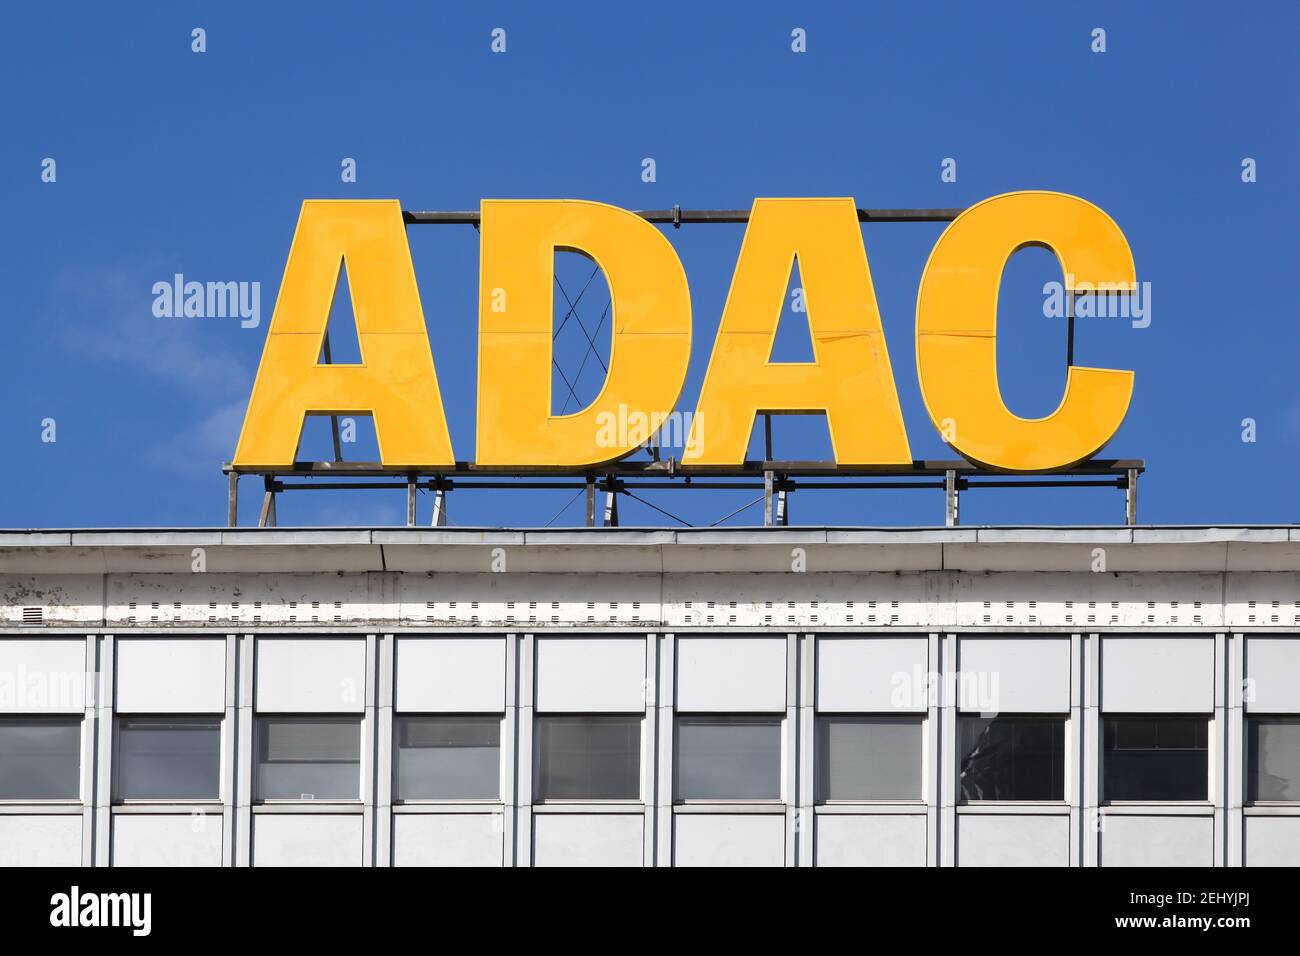 Berlin, Germany - July 12, 2020: ADAC logo on a building. adac is Europe's largest motoring association Stock Photo